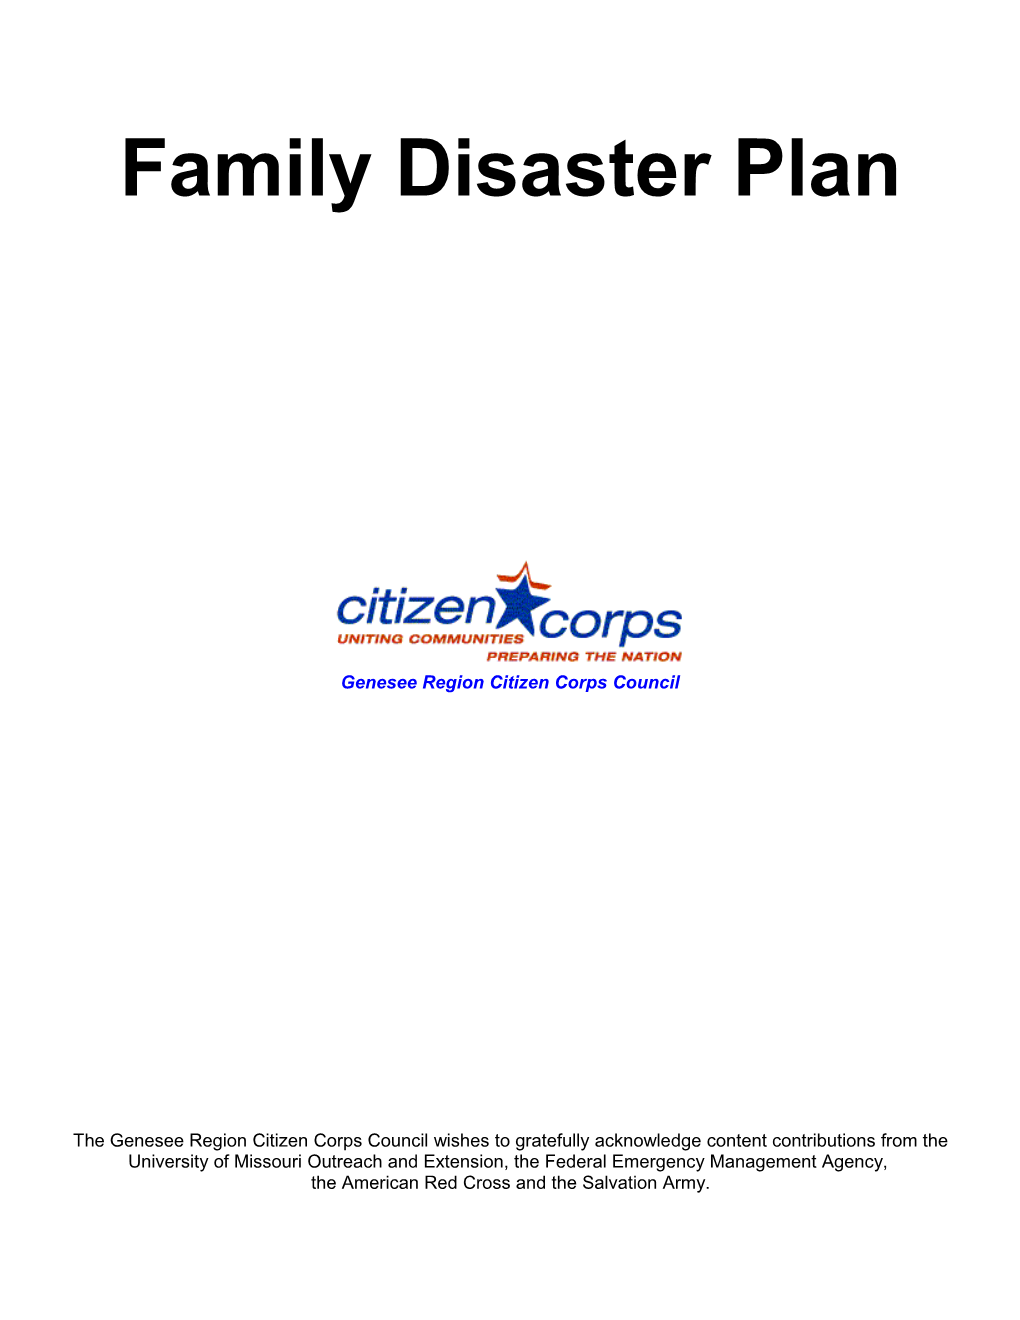 Household Safety and Emergency Plan